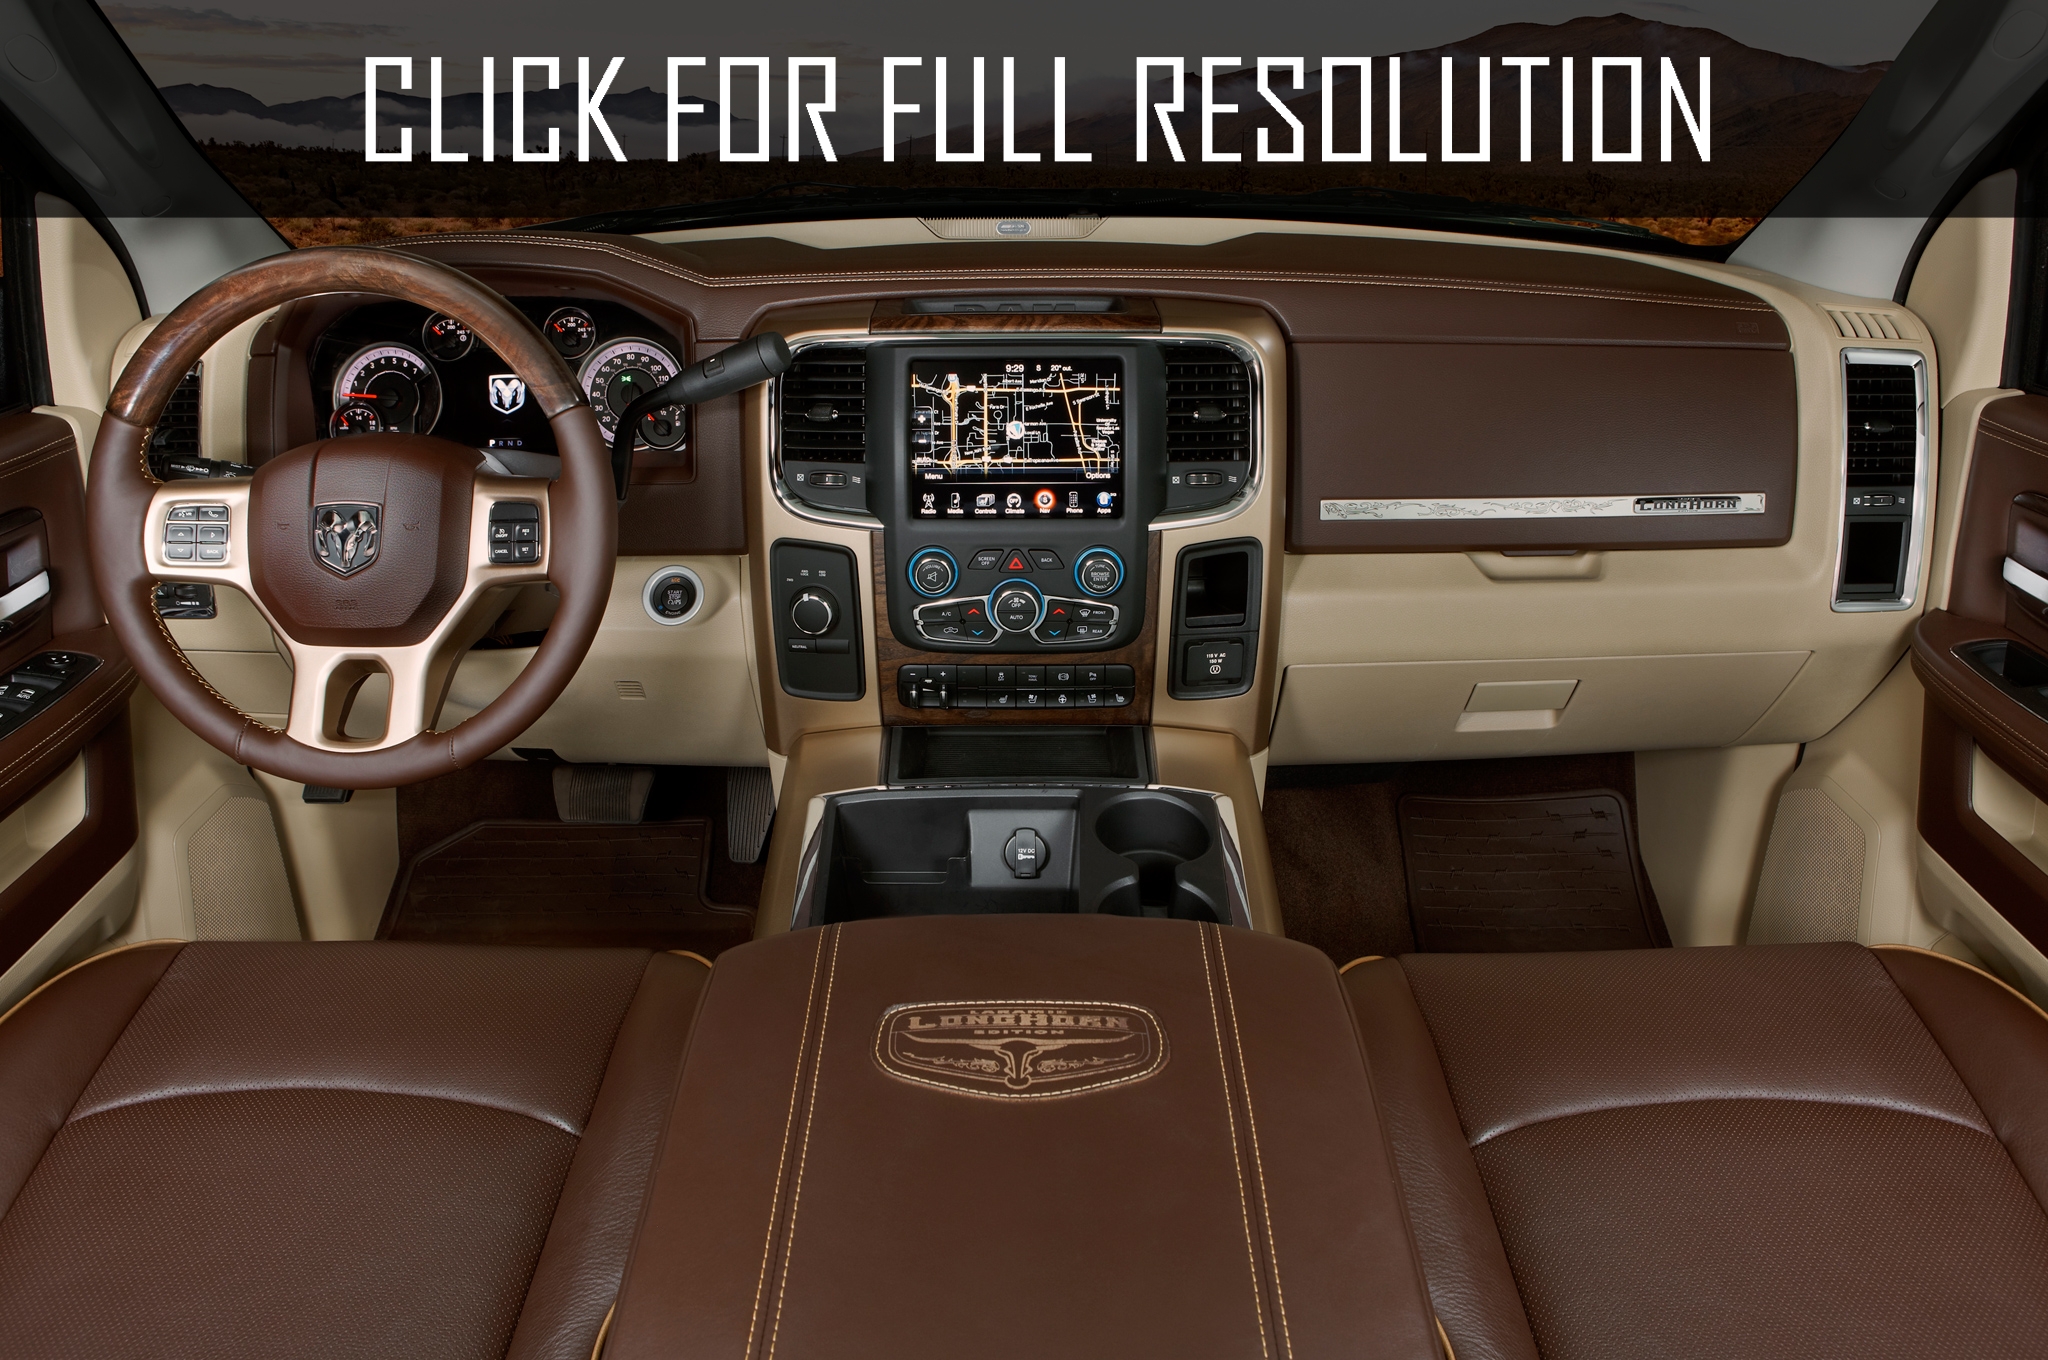 Ford F350 King Ranch 2015 Photo Gallery 3 9